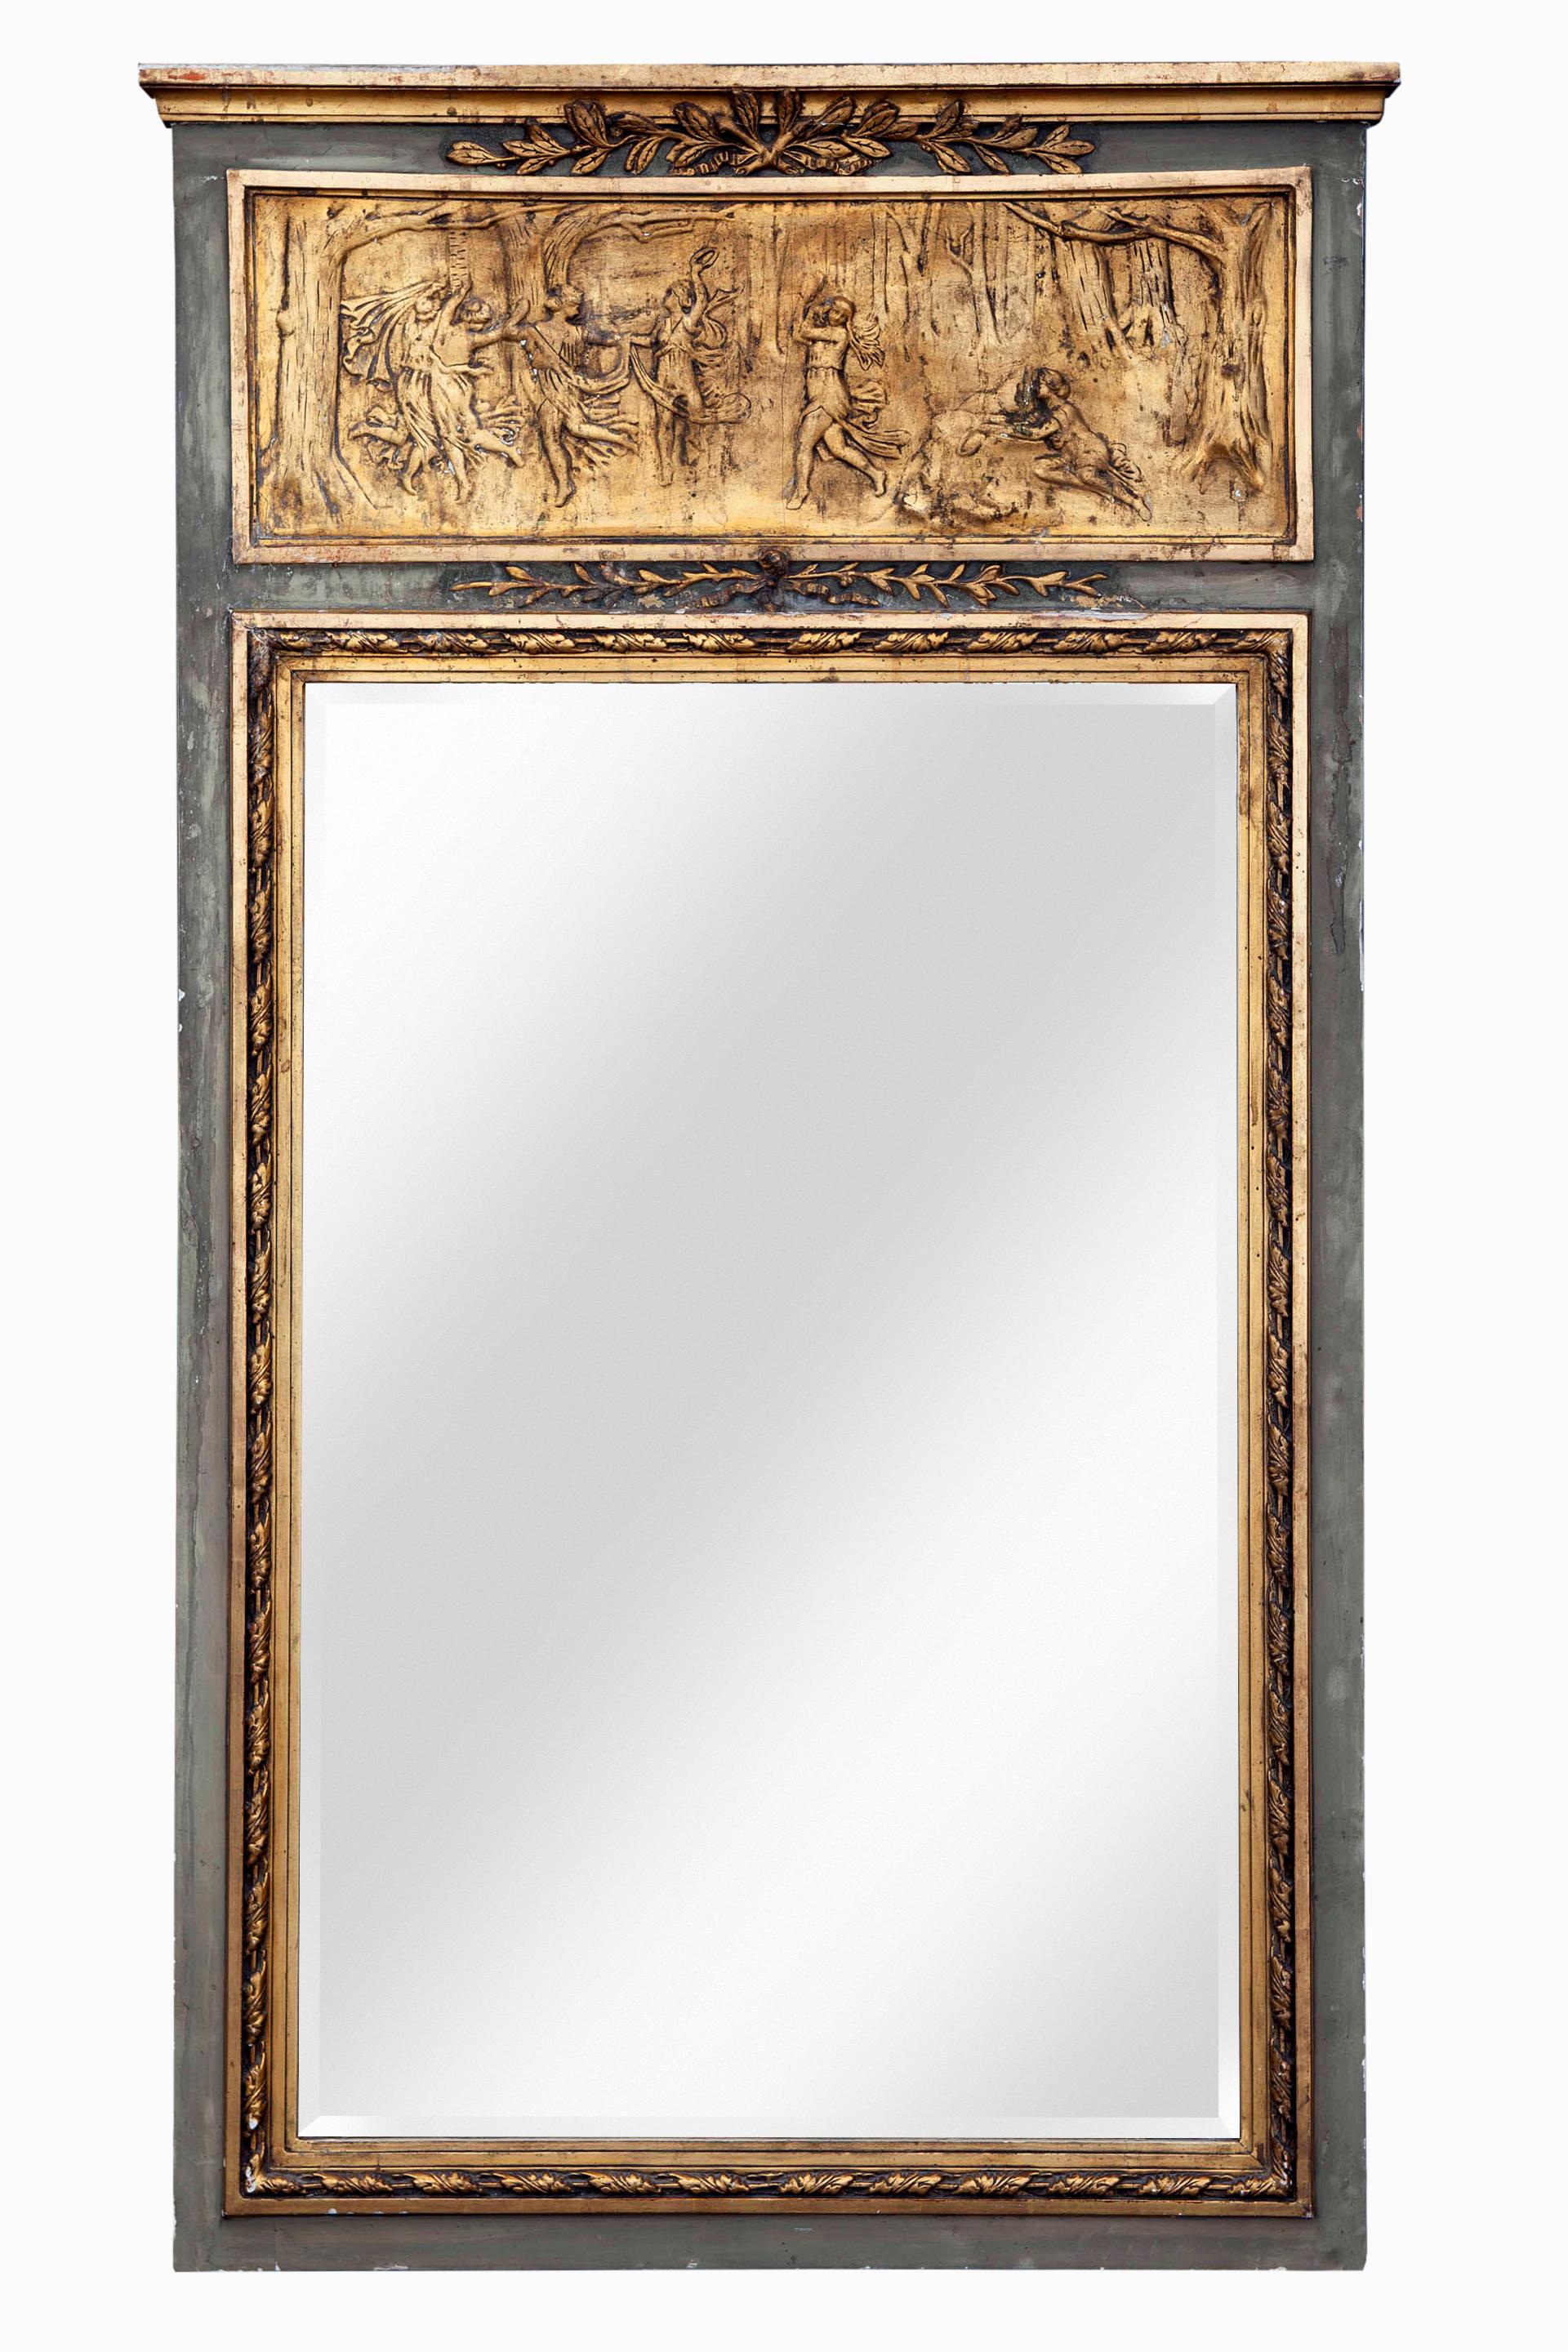 Trumeau Mirror with Dancers in Giltwood / French Gray Frame For Sale 1